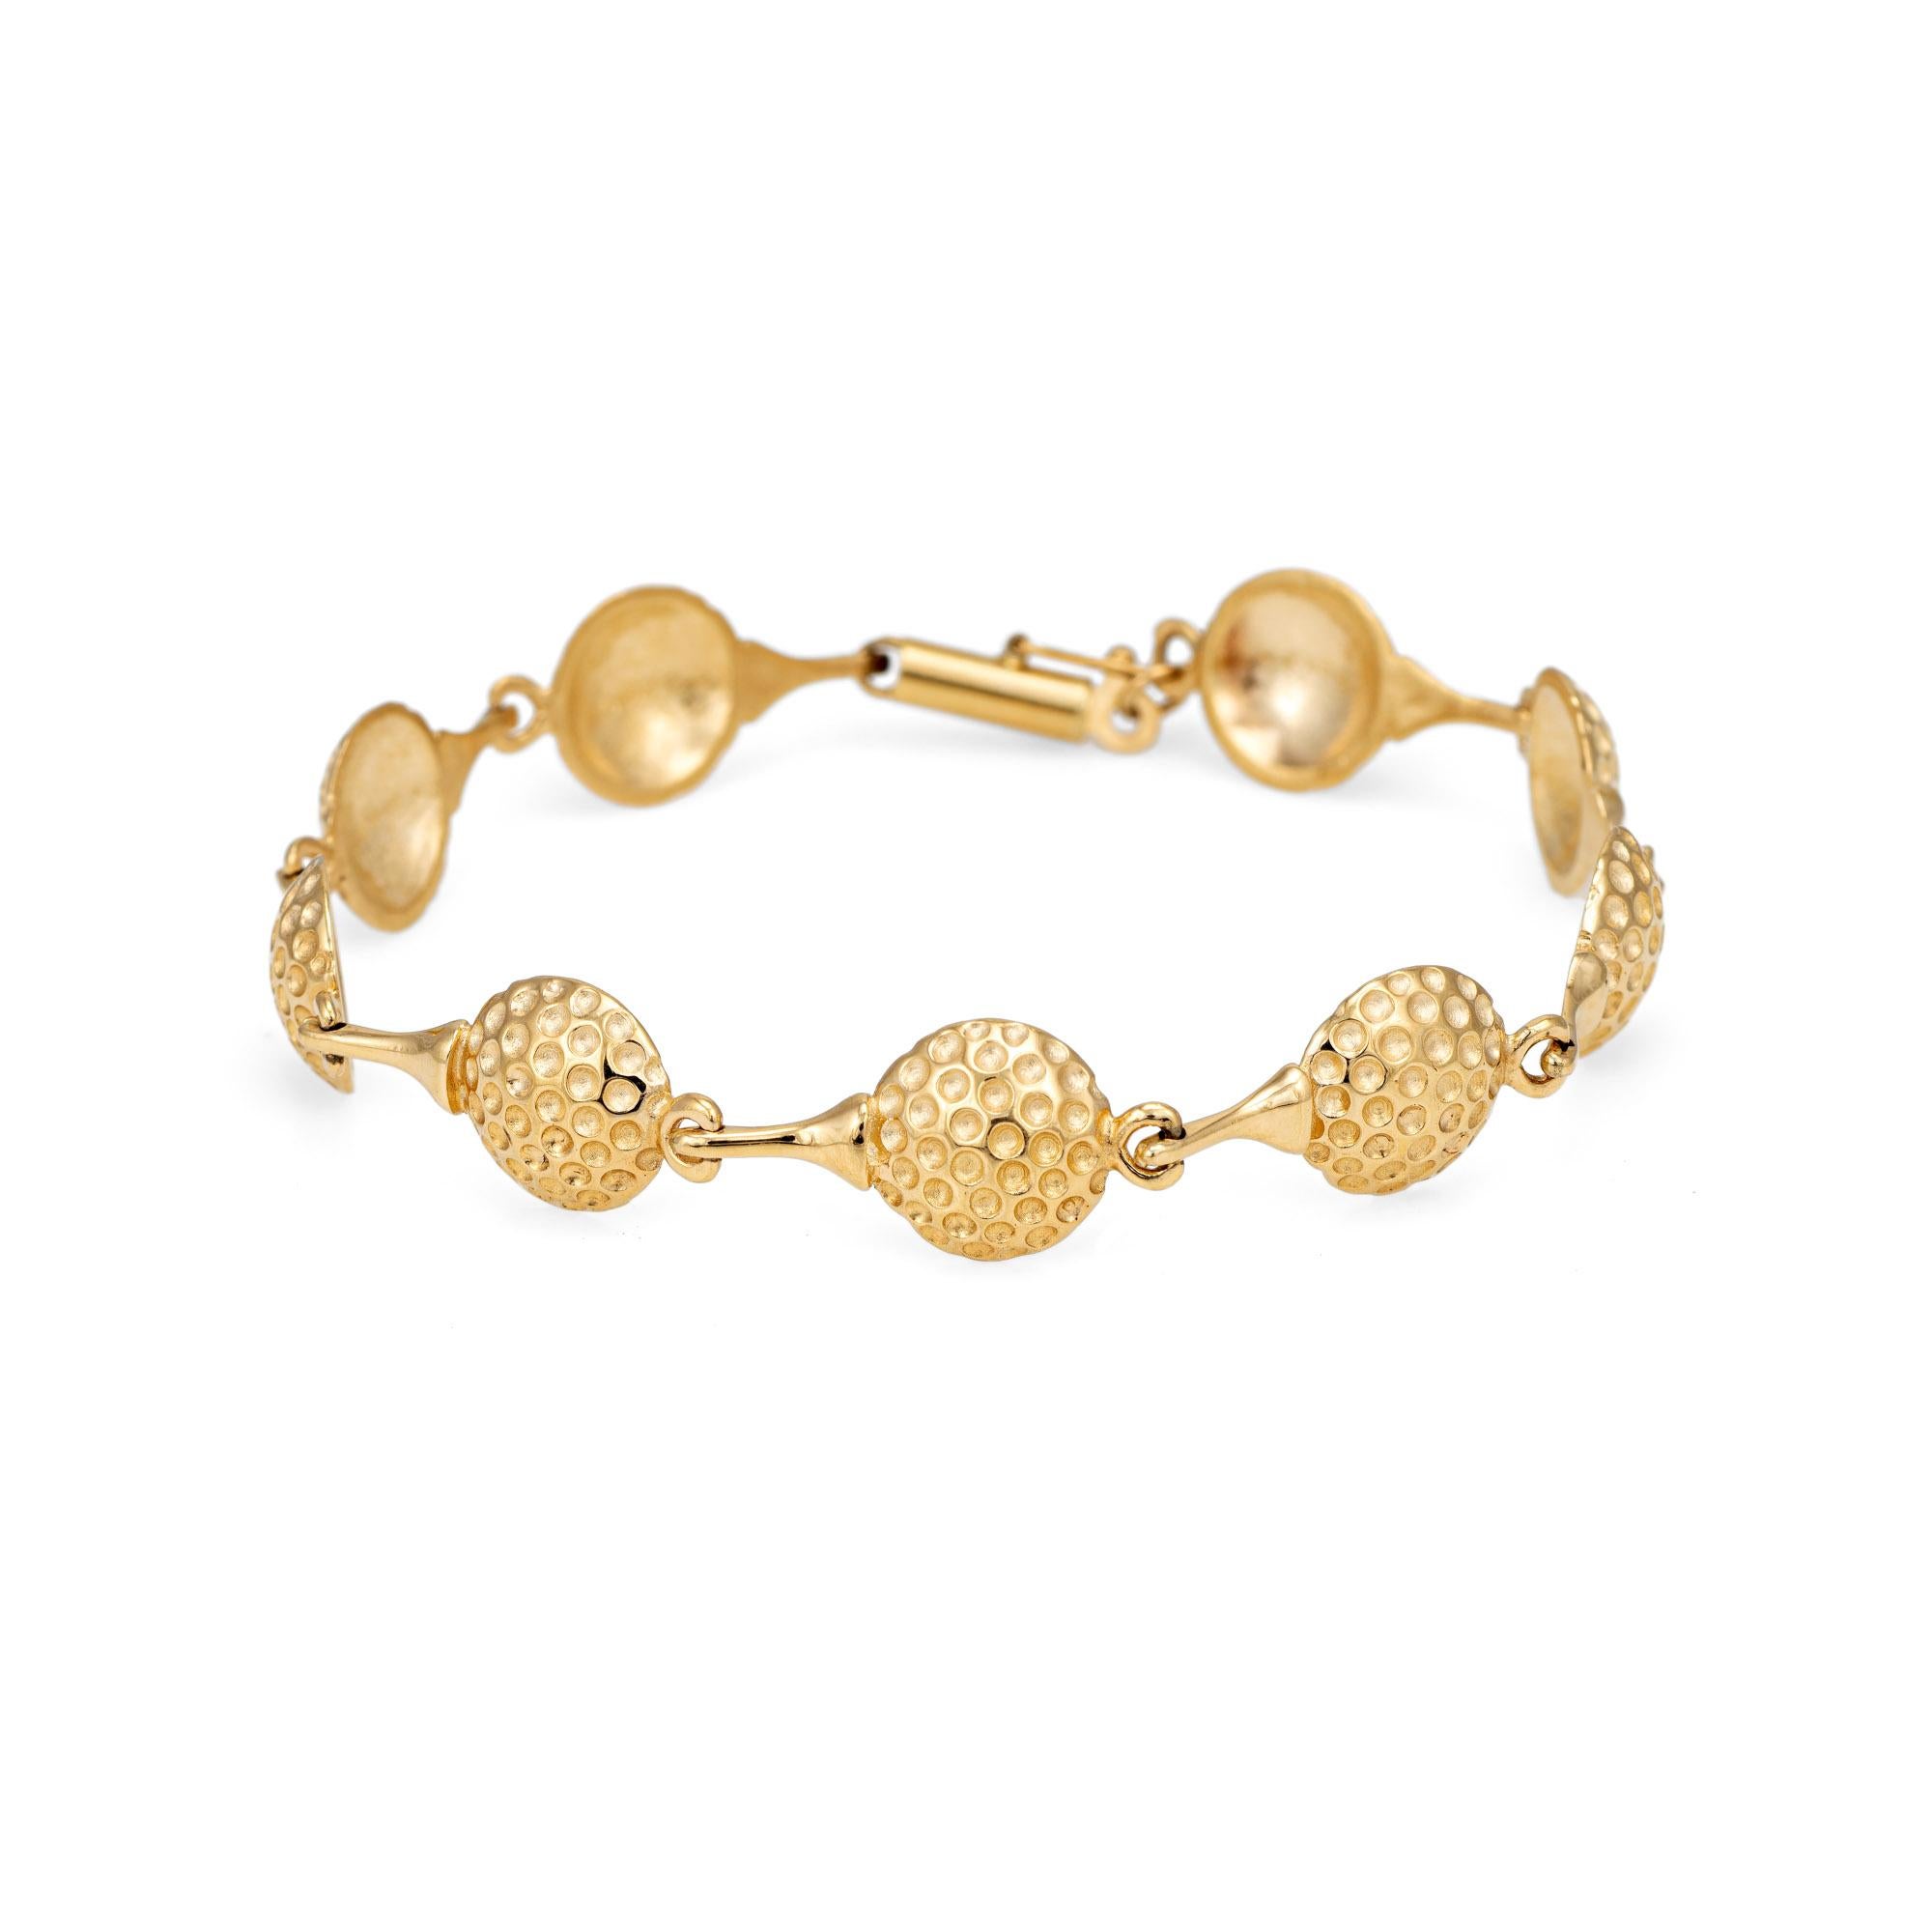 Distinct and stylish golf ball bracelet crafted in 14k yellow gold. 

Linked golf balls set upon a tee forms the distinct bracelet. The bracelet is great worn alone or layered. 

The bracelet is in very good condition and was lightly cleaned and